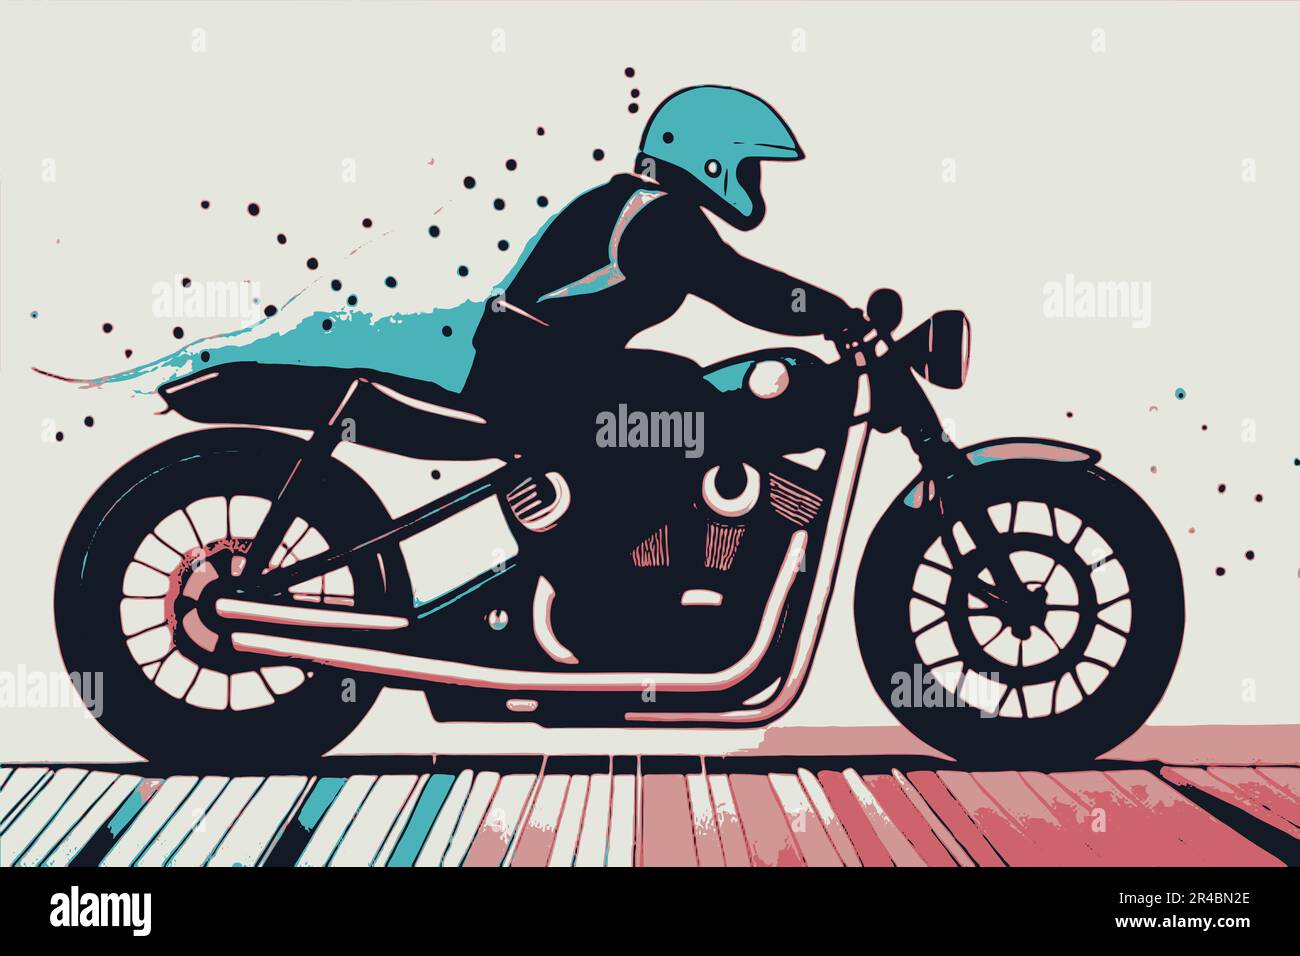 amazing abstract pictures that are very beautiful and have arrangements and colors that really sell the motorcycle and rider themes Stock Vector